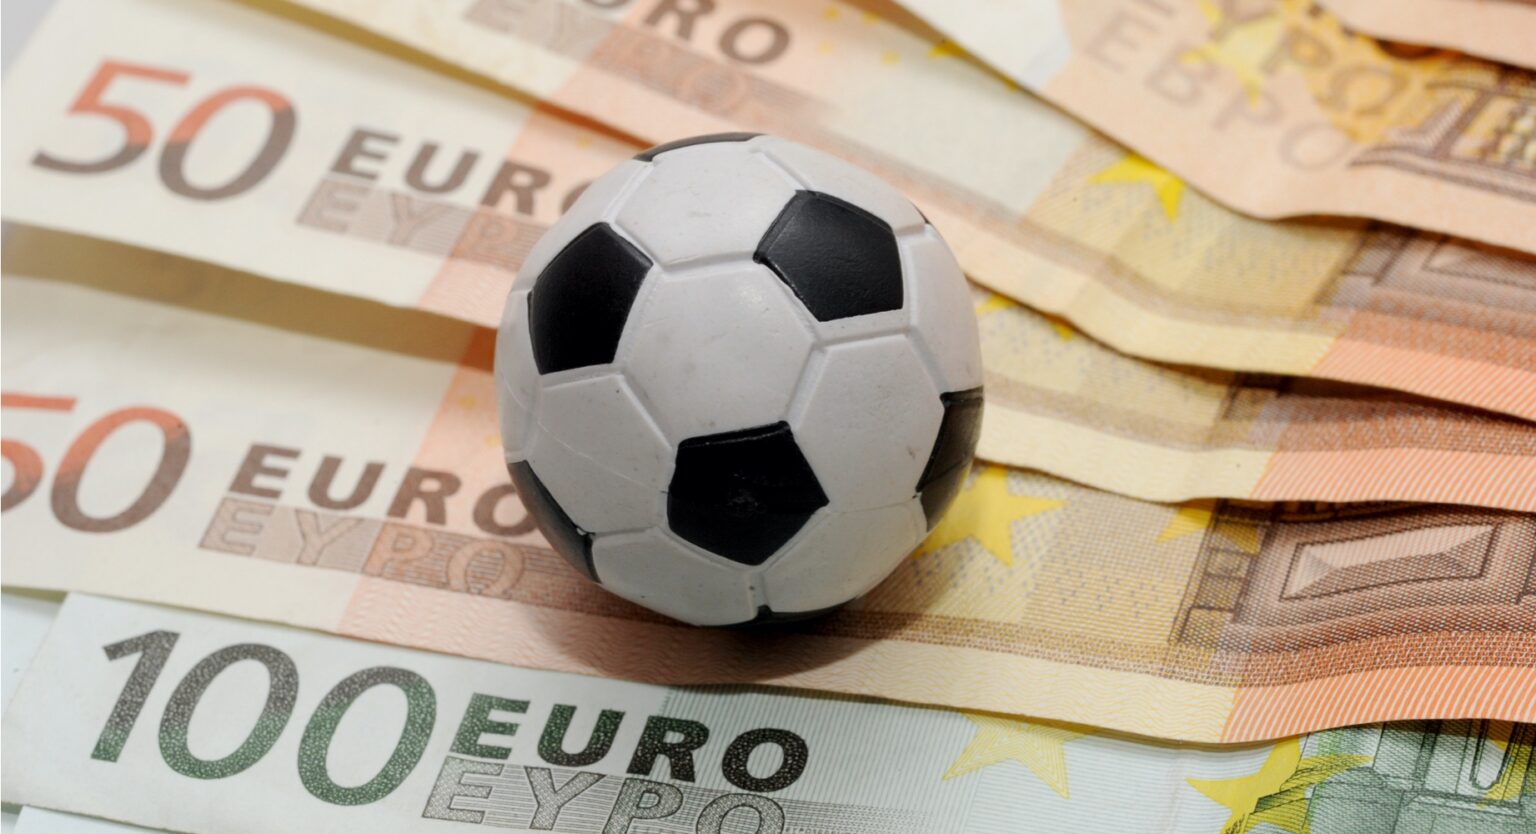 european bookmakers online that offer basketball